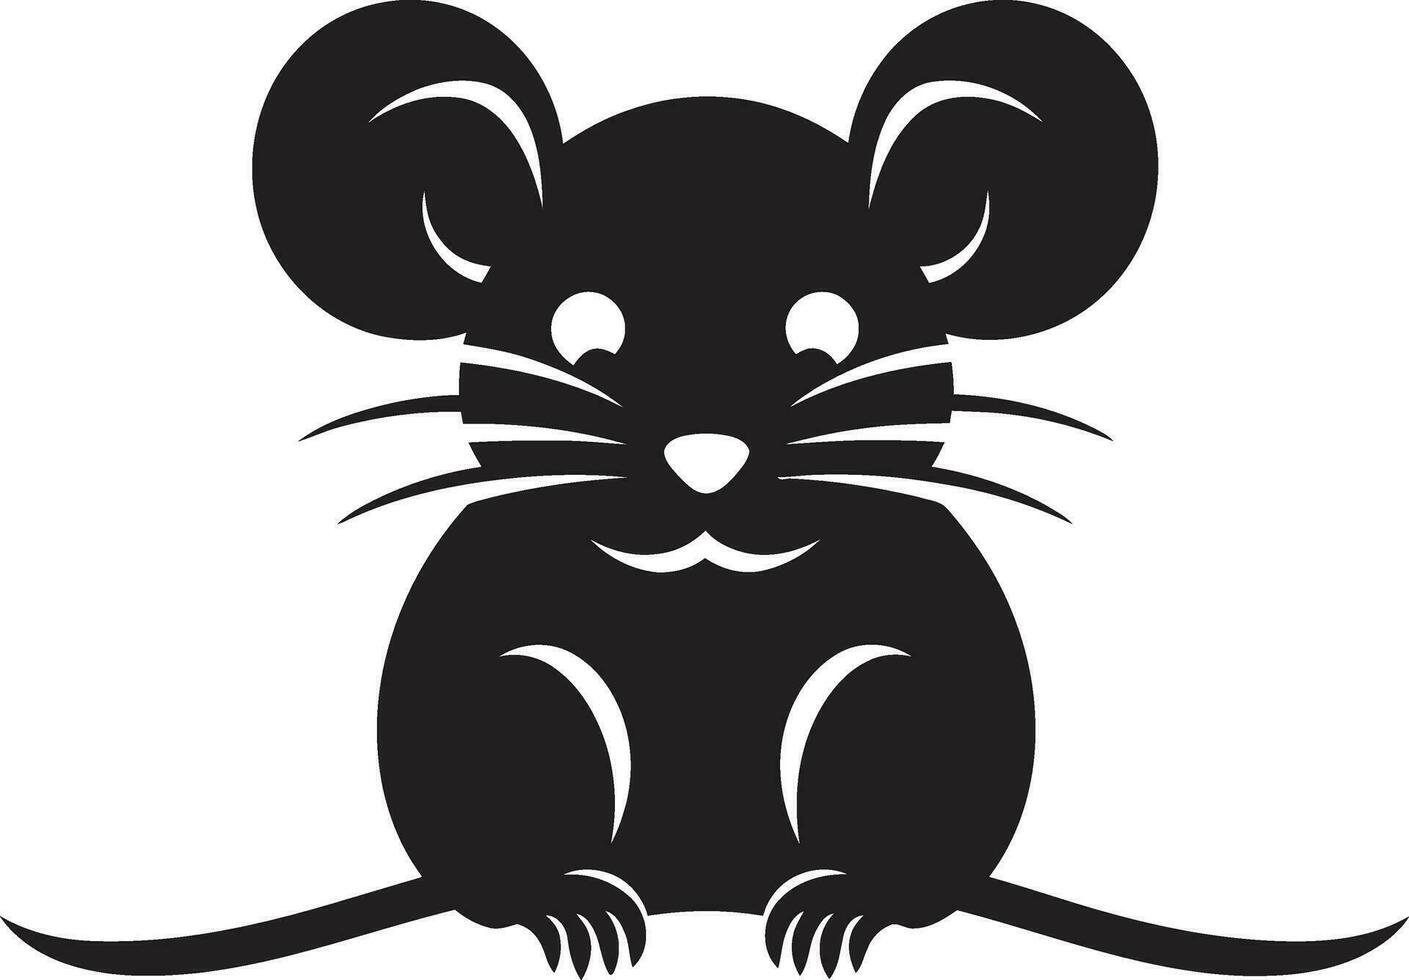 Crafting Detailed Mouse Vectors in Illustrator Designing a Mouse Mascot Vector Art Tutorial